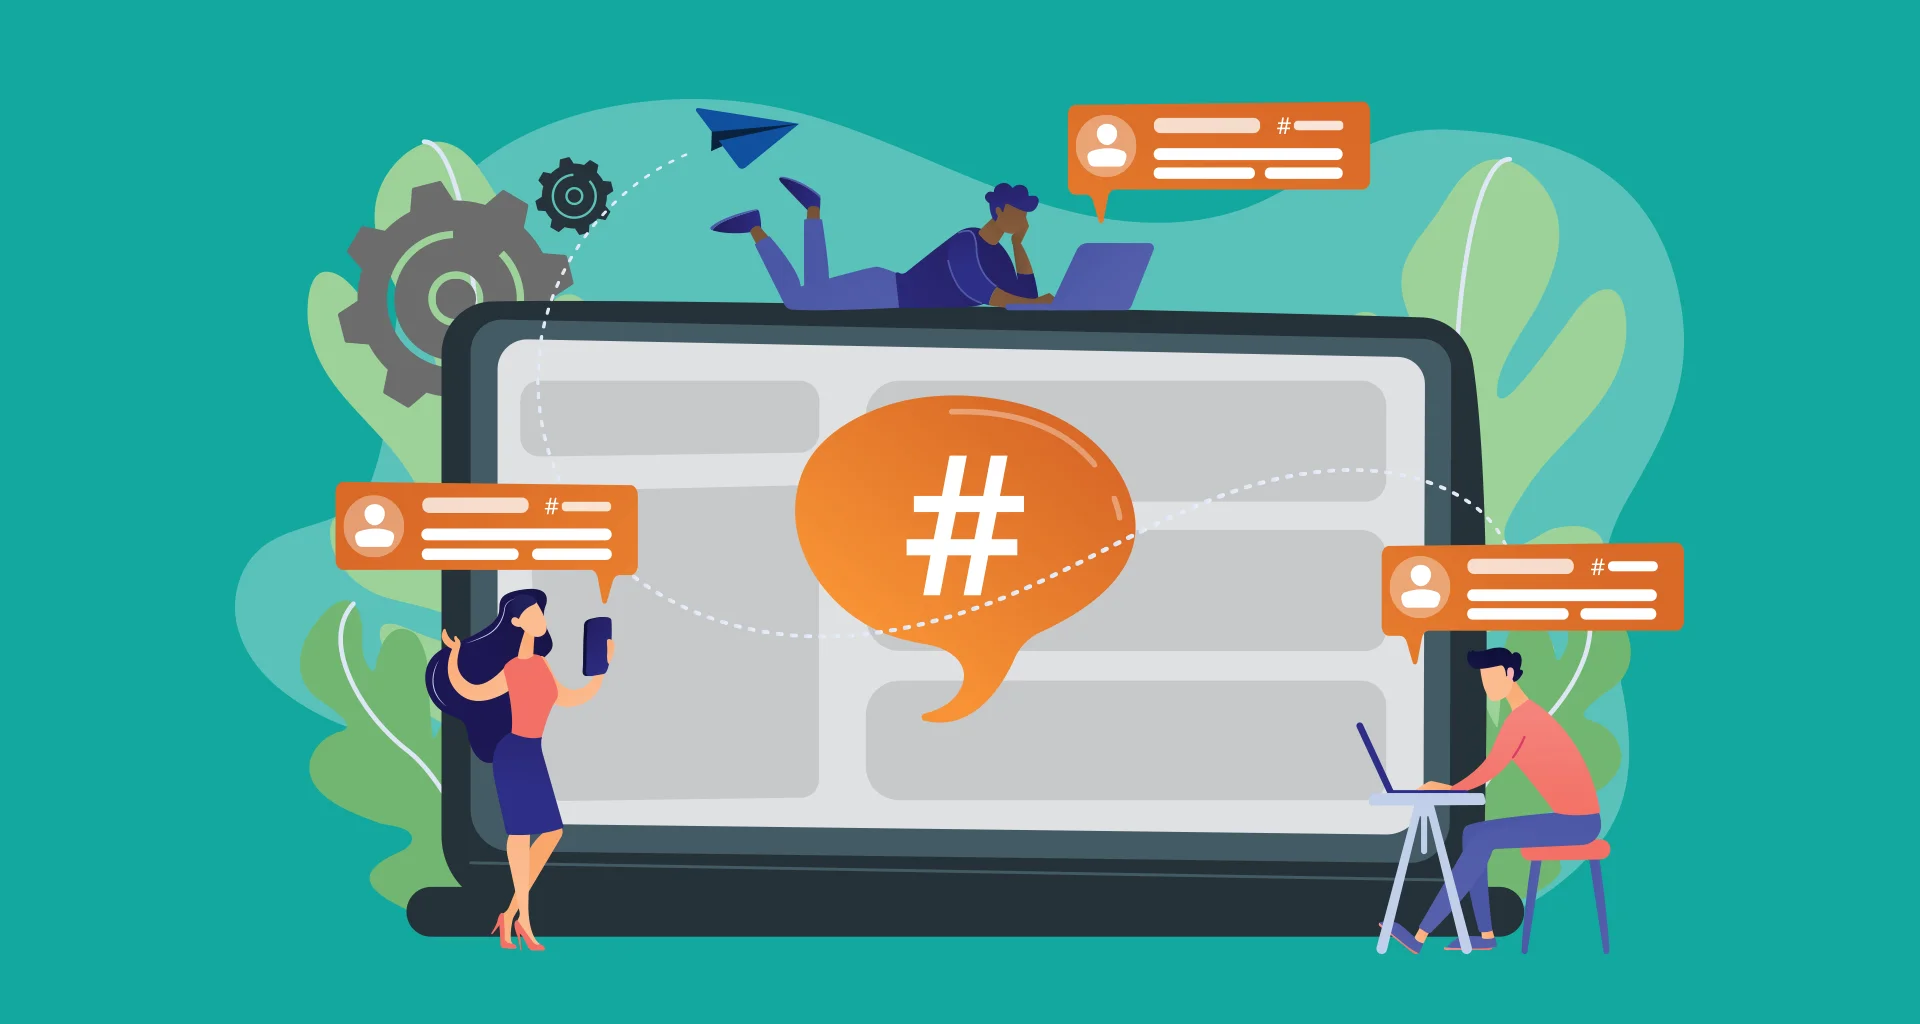 The Importance Of A #Hashtag Library